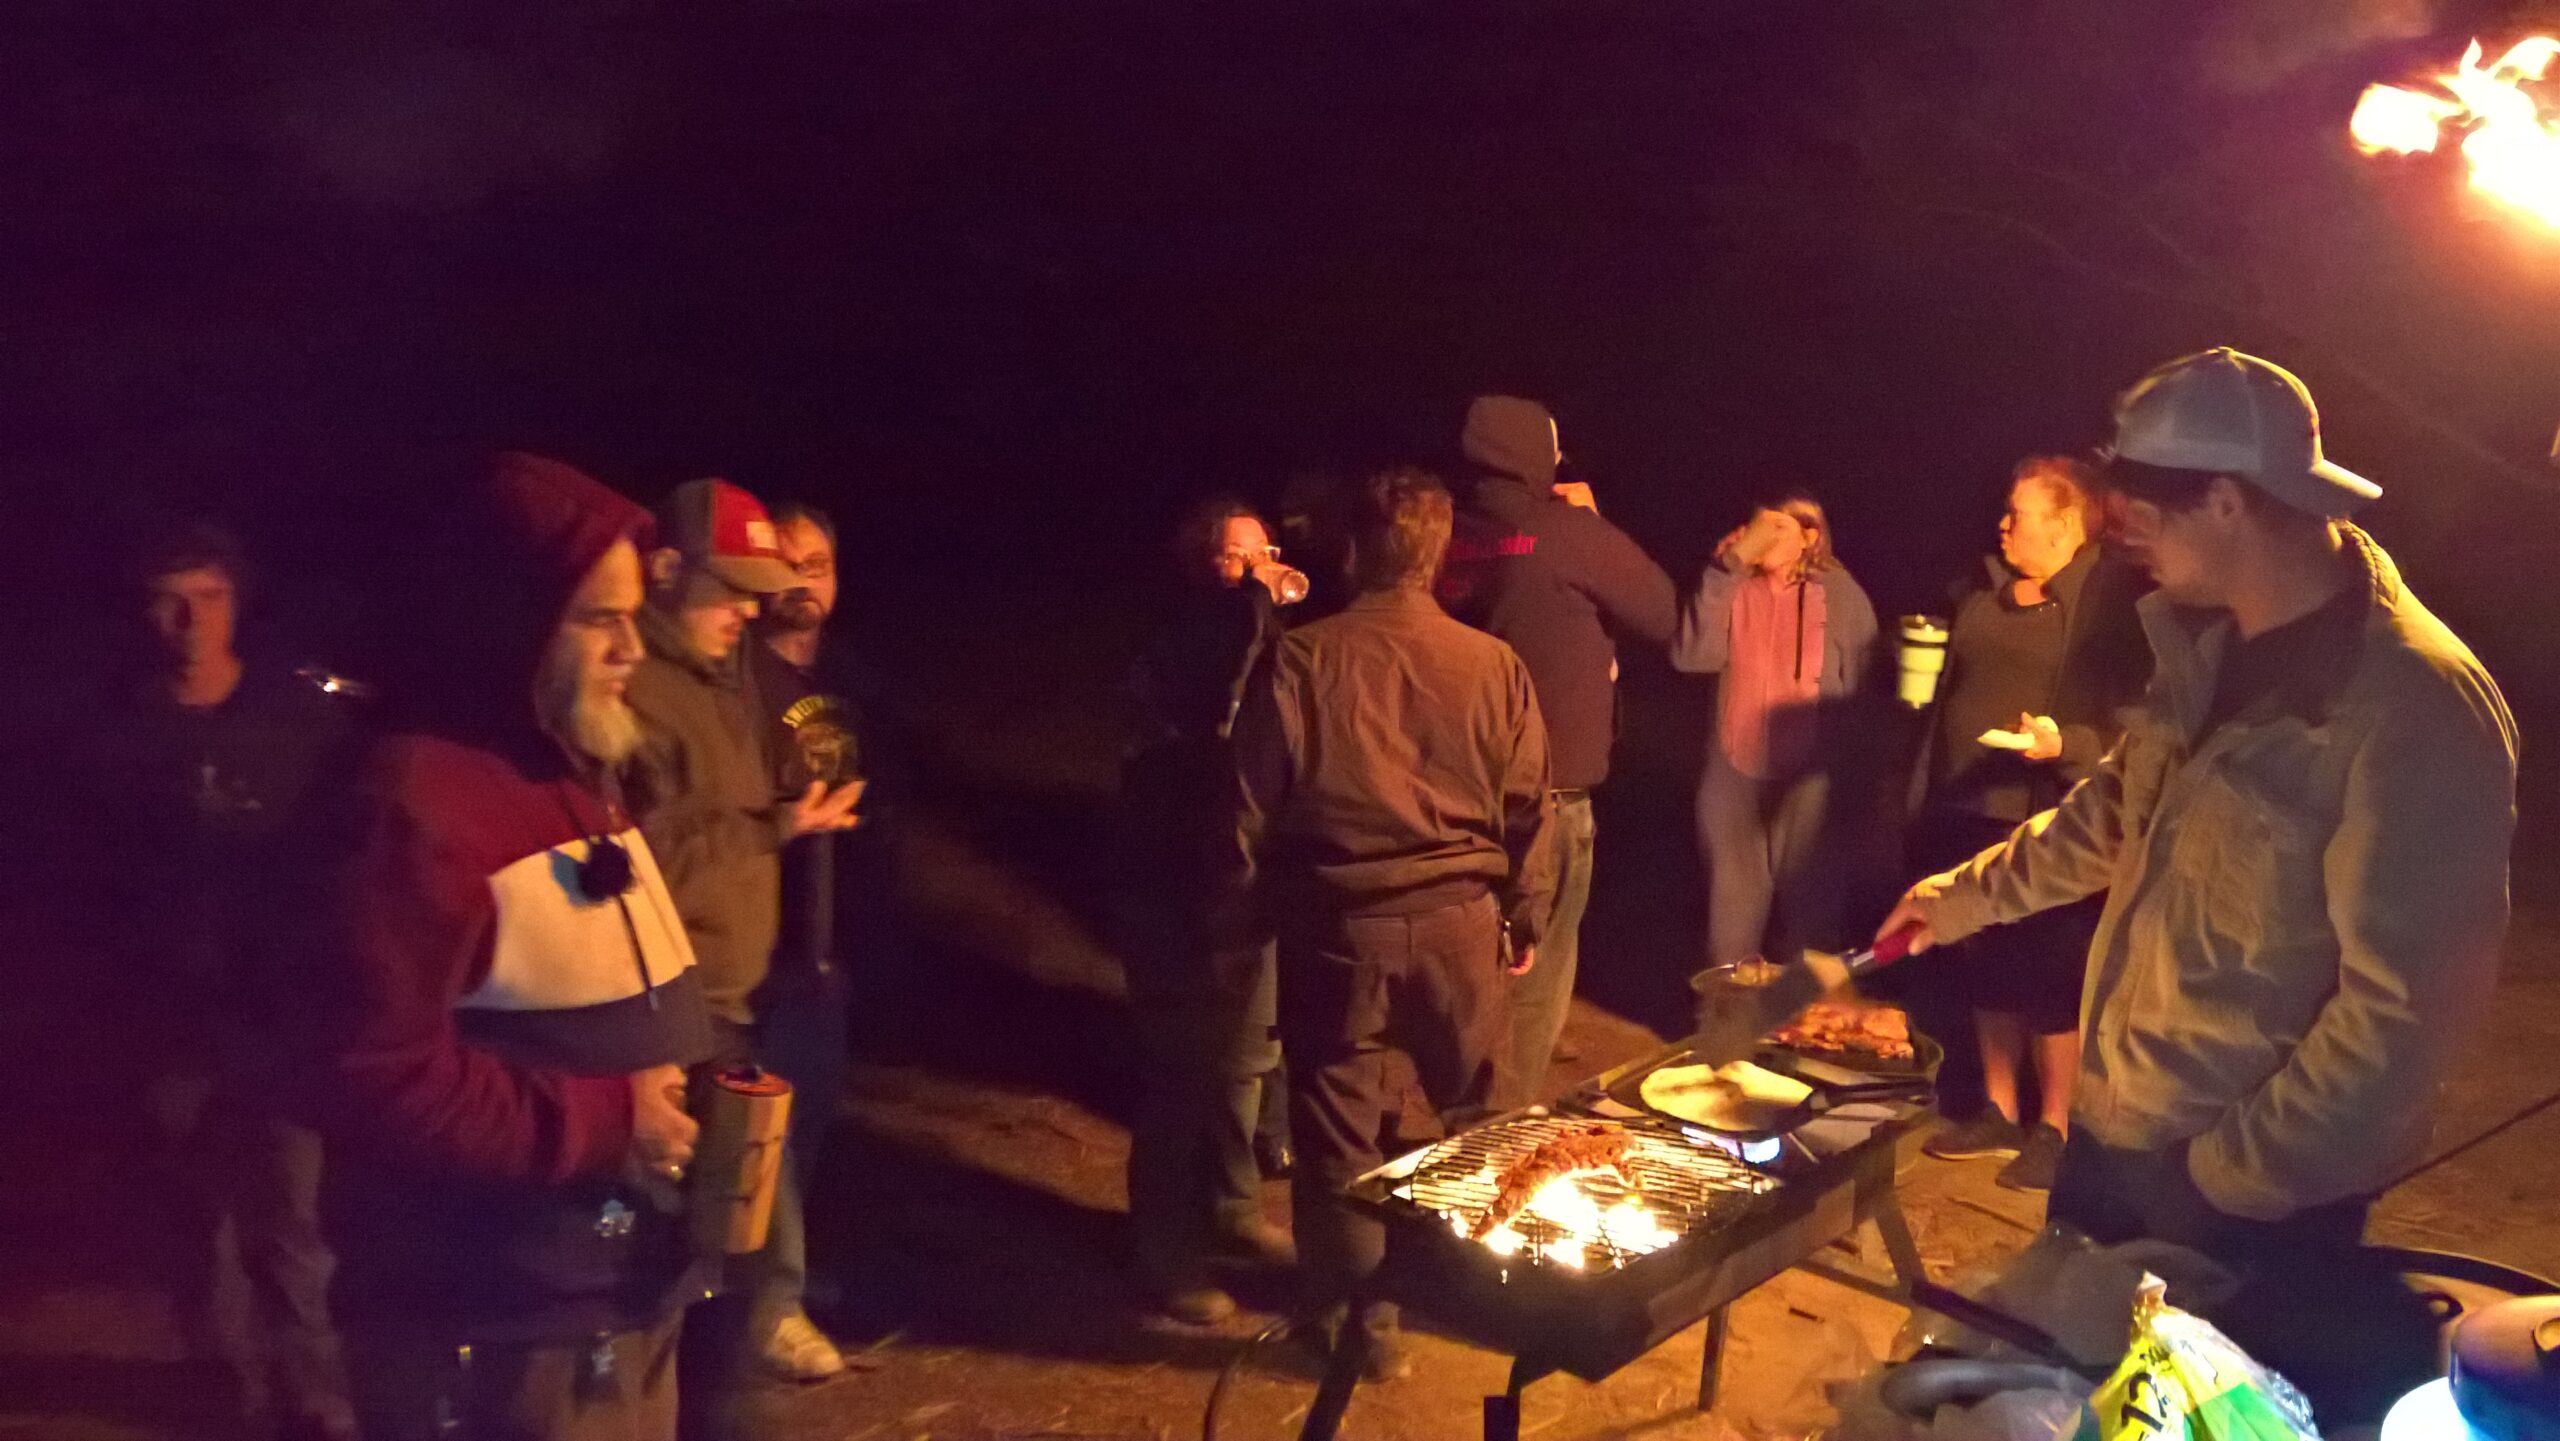 campers cooking food and mingling at night